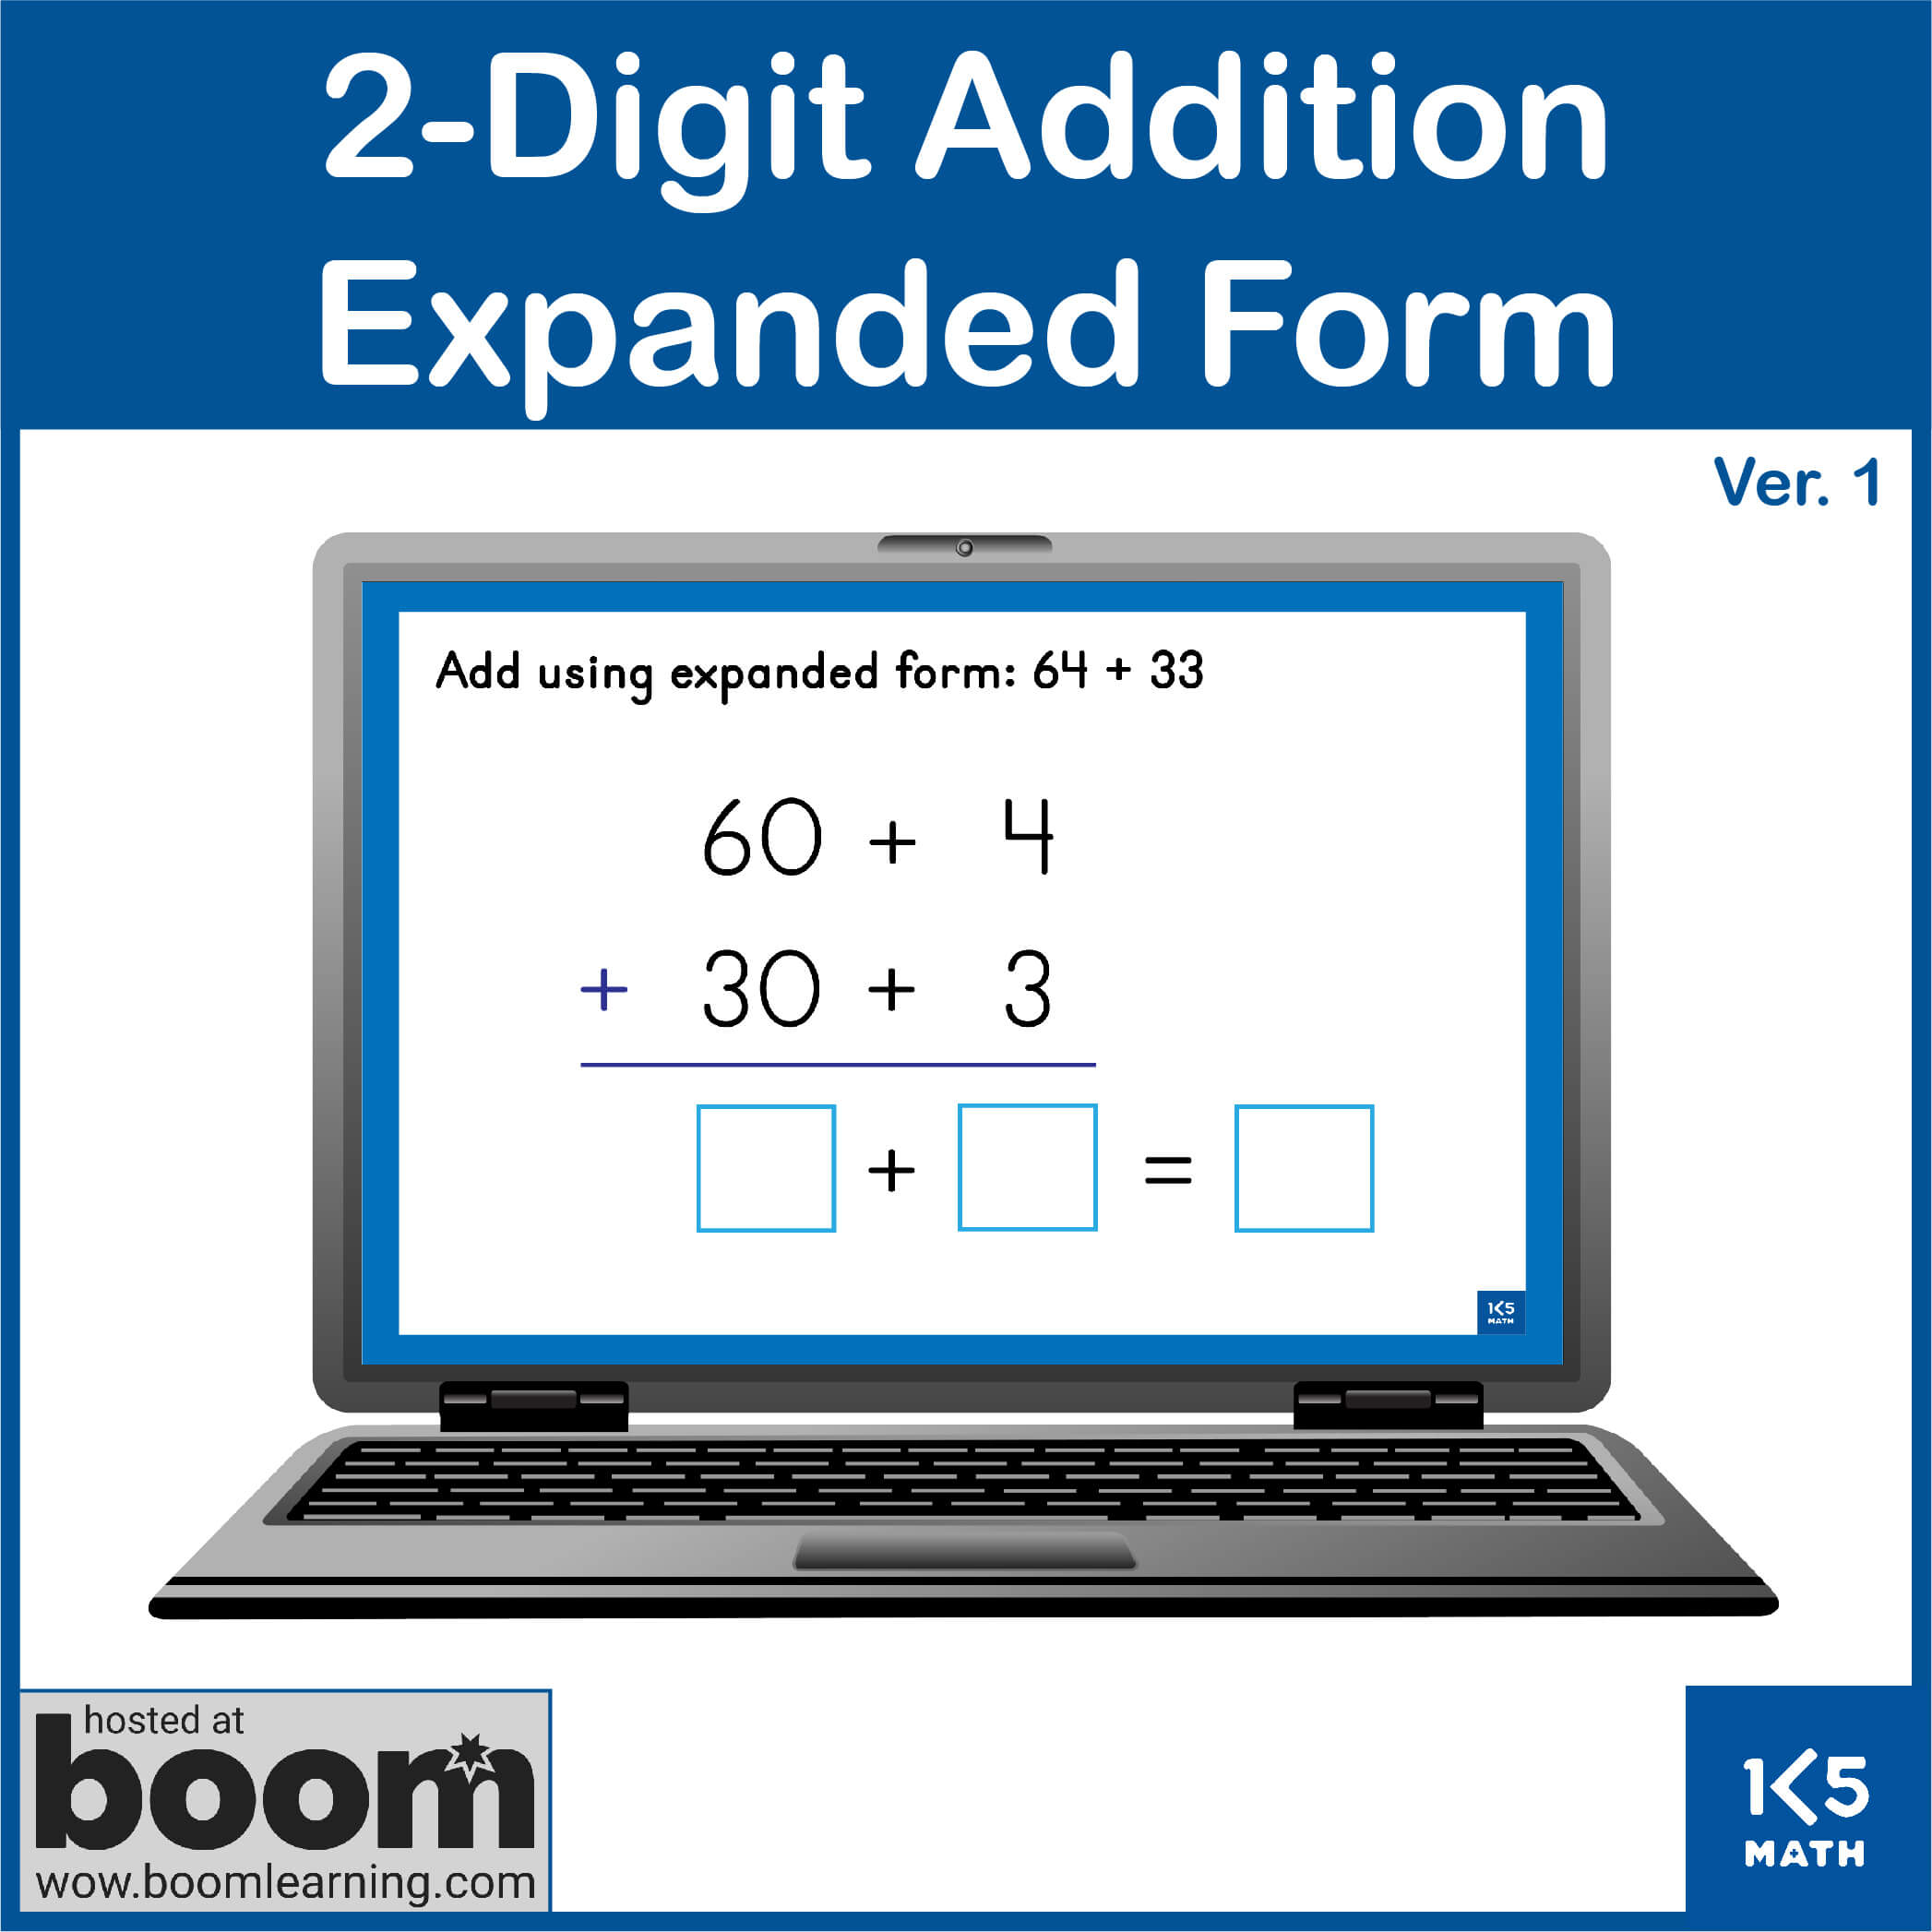 Boom Cards: 2-Digit Addition Expanded Form